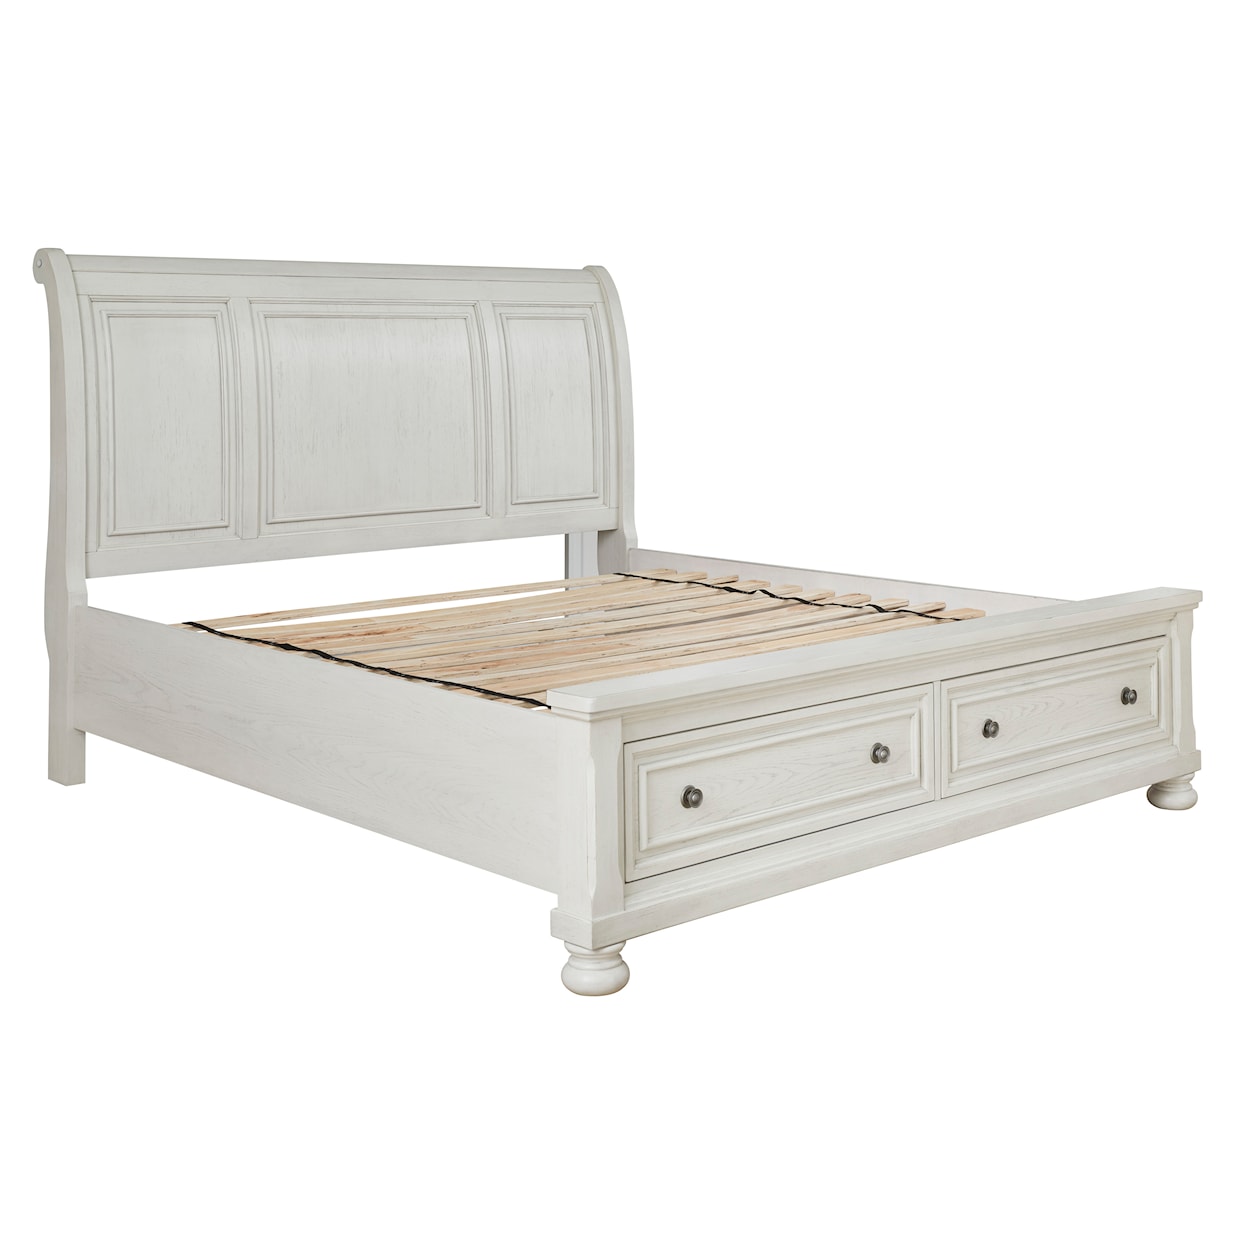 Signature Design by Ashley Robbinsdale King Sleigh Bed with Storage